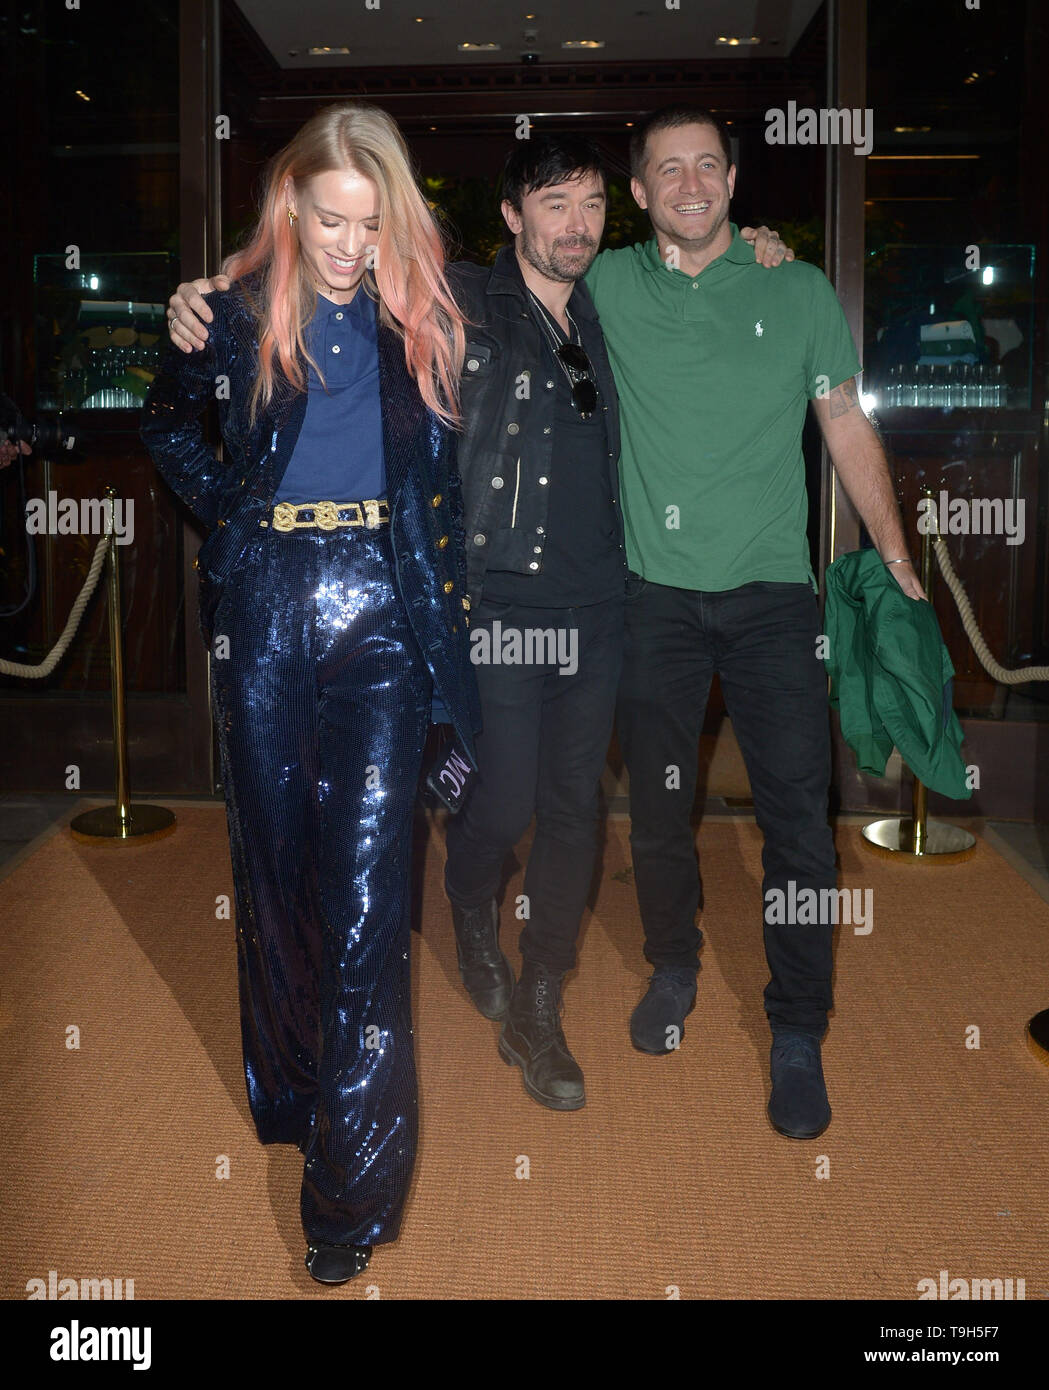 Various celebrities attend Polo Ralph Lauren The Earth Polo Party  Featuring: Mary Charteris Tyrone Wood Where: London, United Kingdom When:  17 Apr 2019 Credit: WENN.com Stock Photo - Alamy